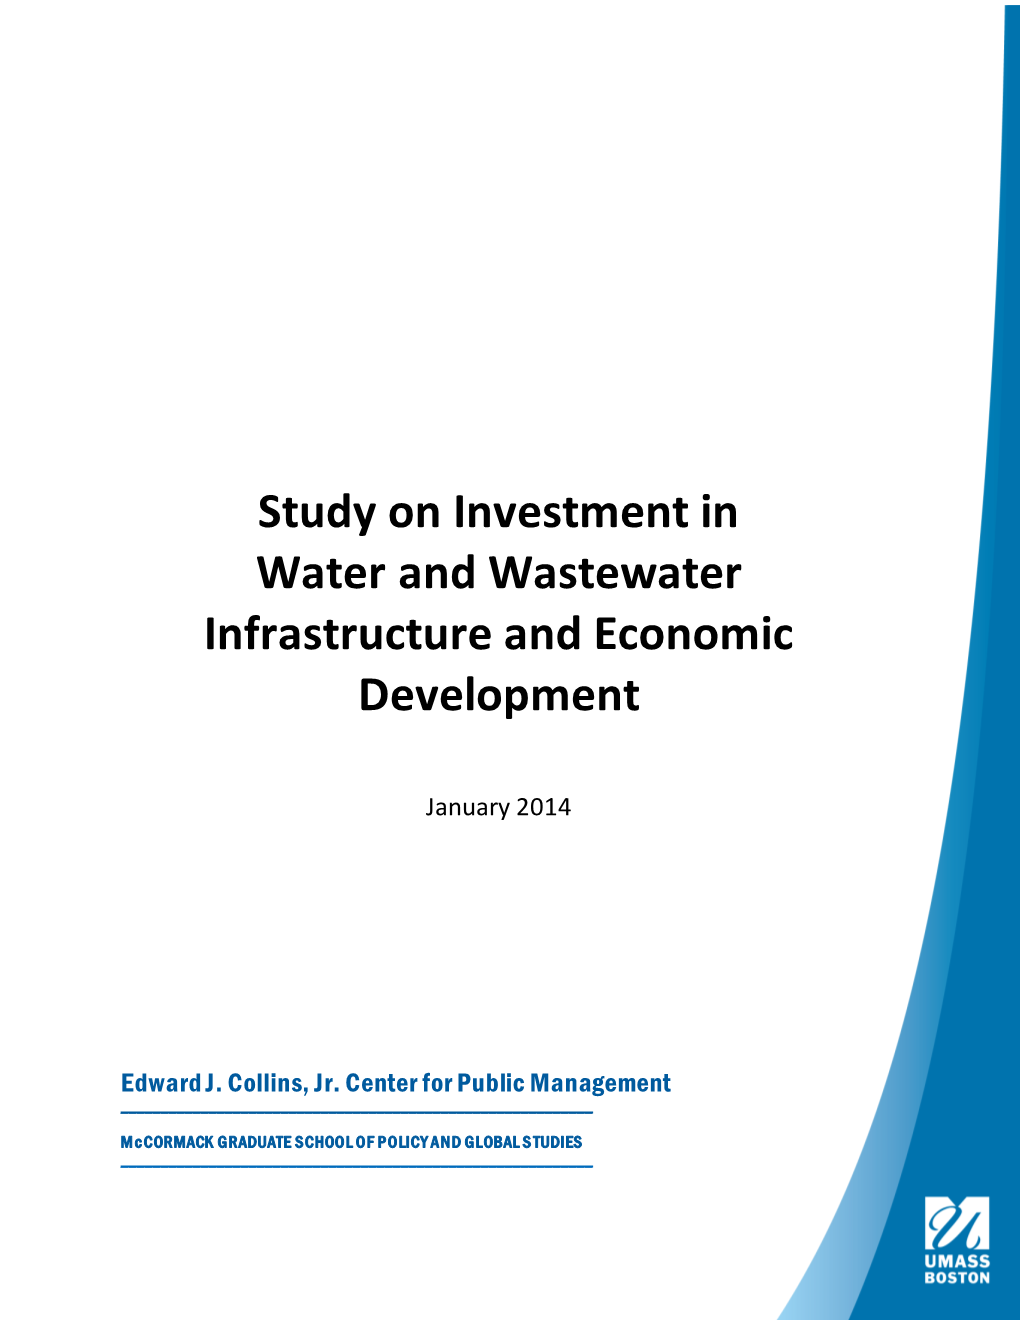 Study on Investment in Water and Wastewater Infrastructure and Economic Development